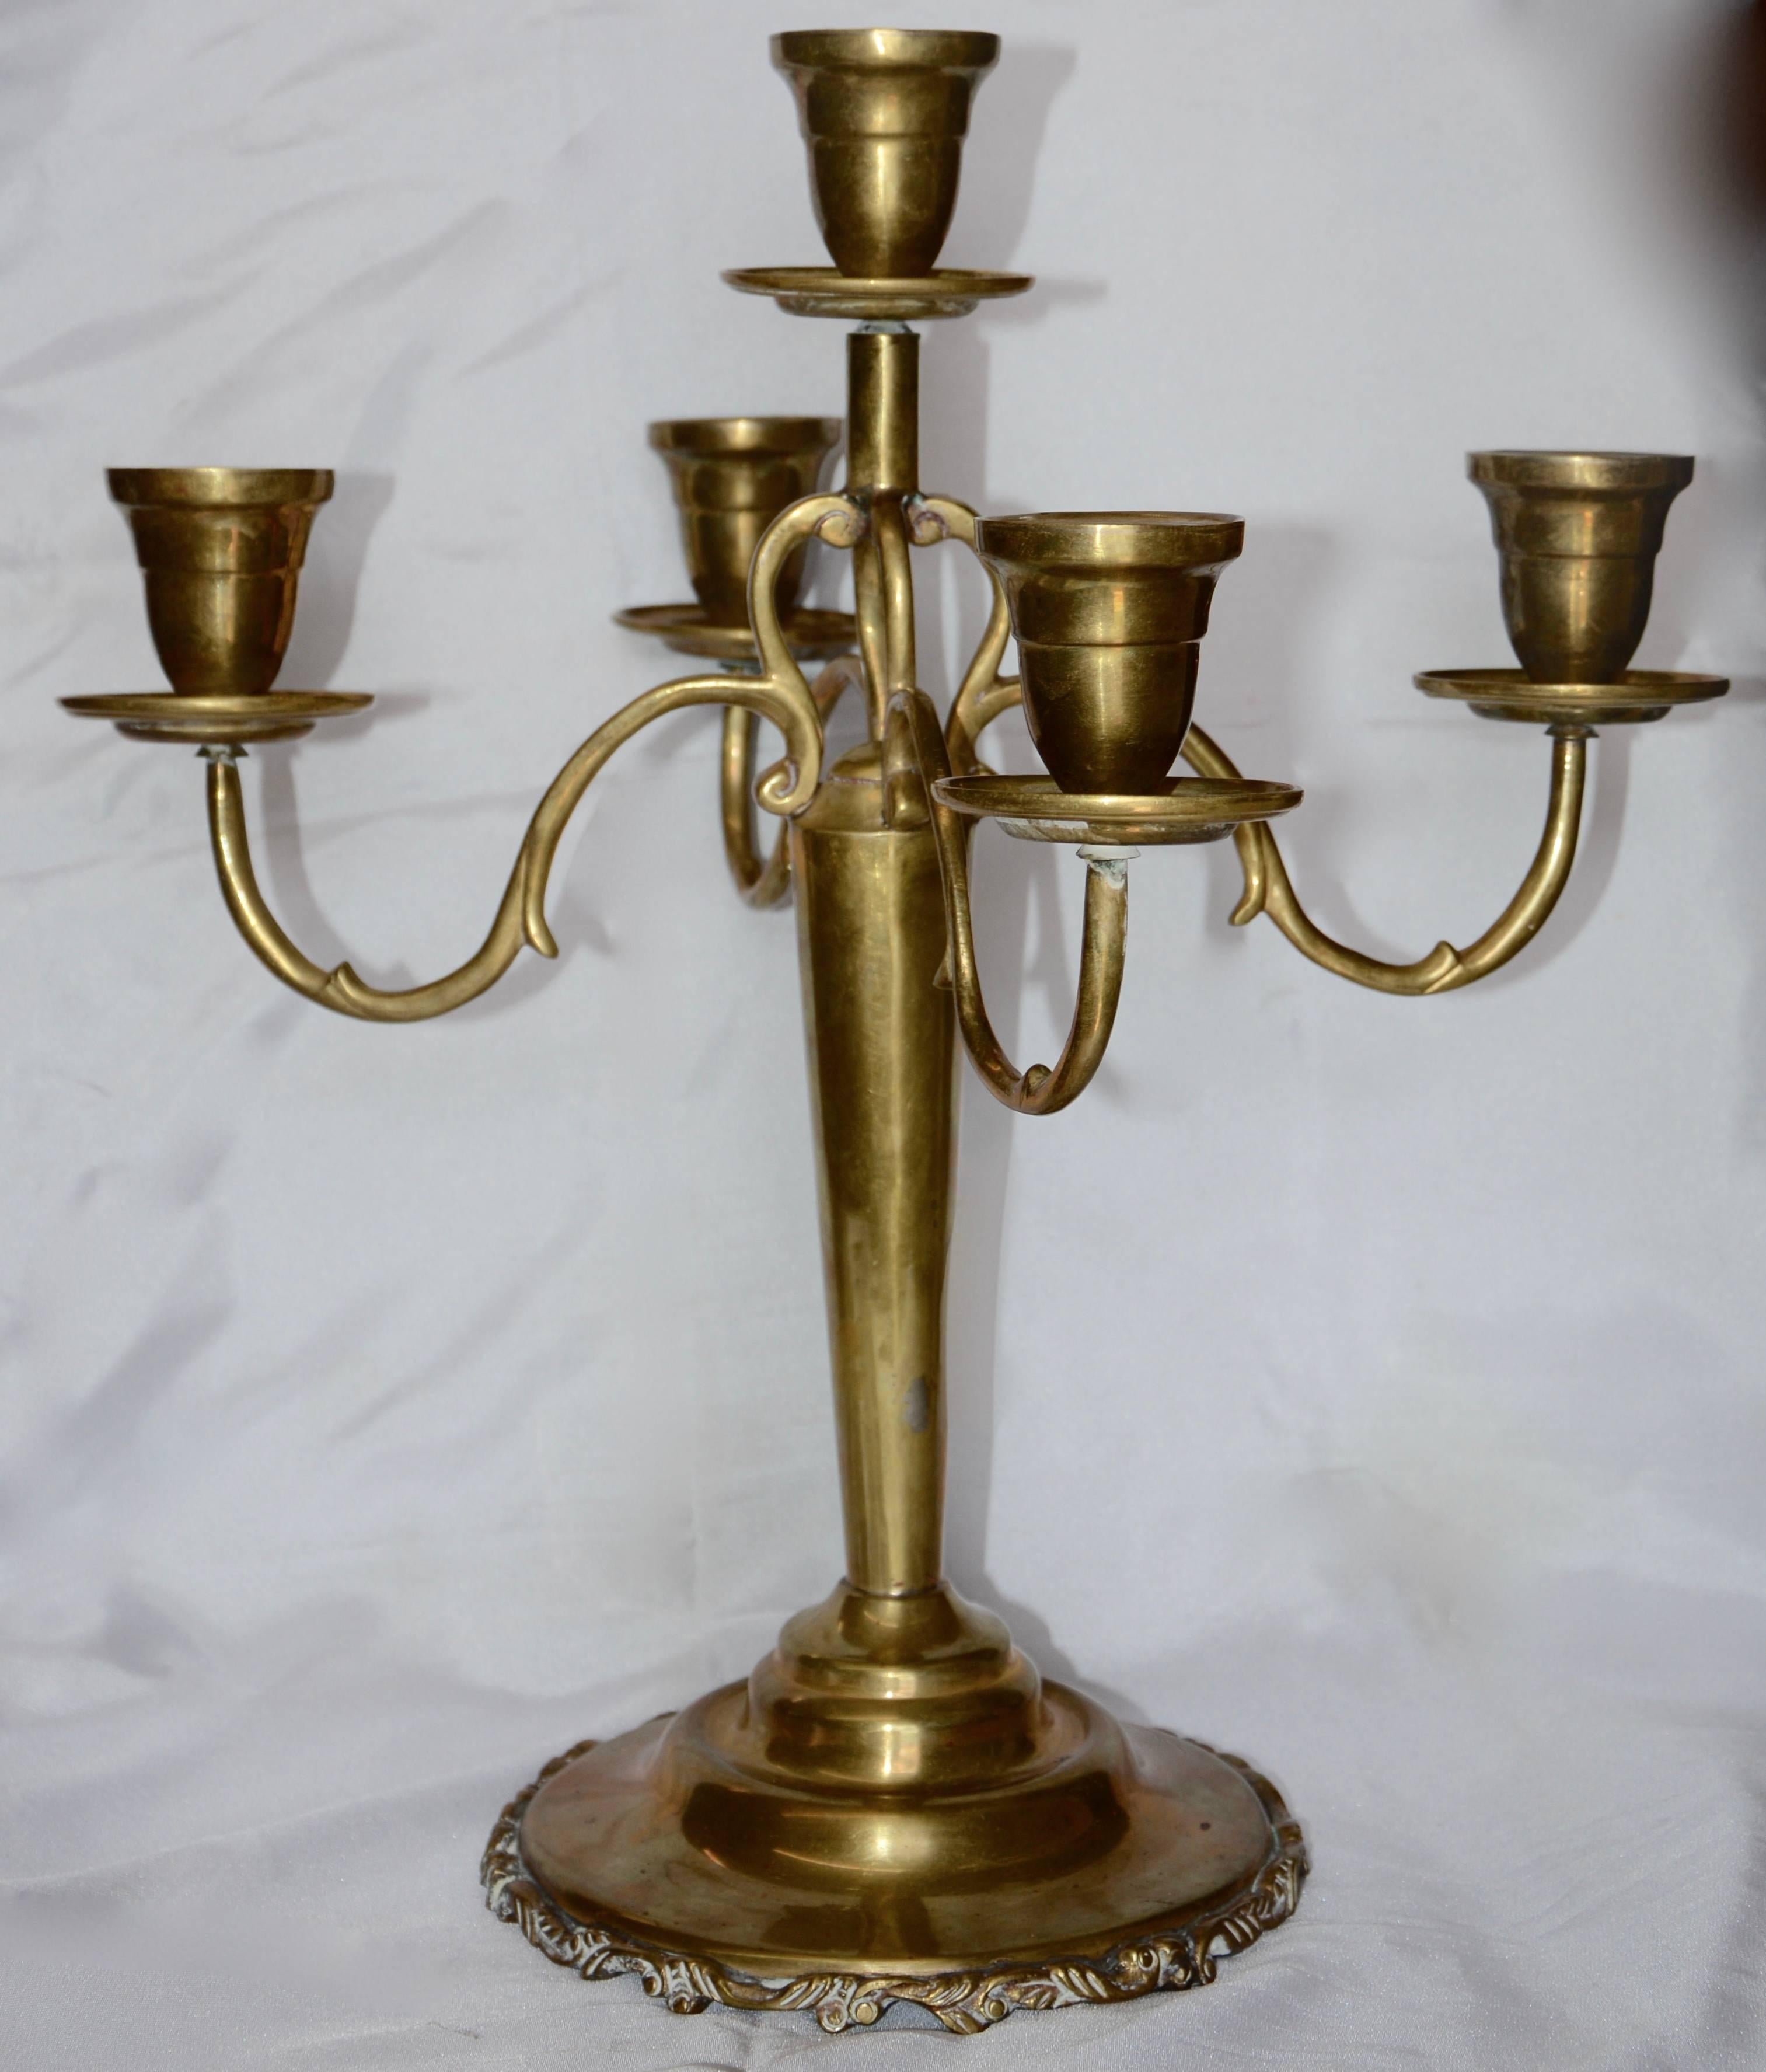 Cast Brass Candelabra with Four Arms Vintage